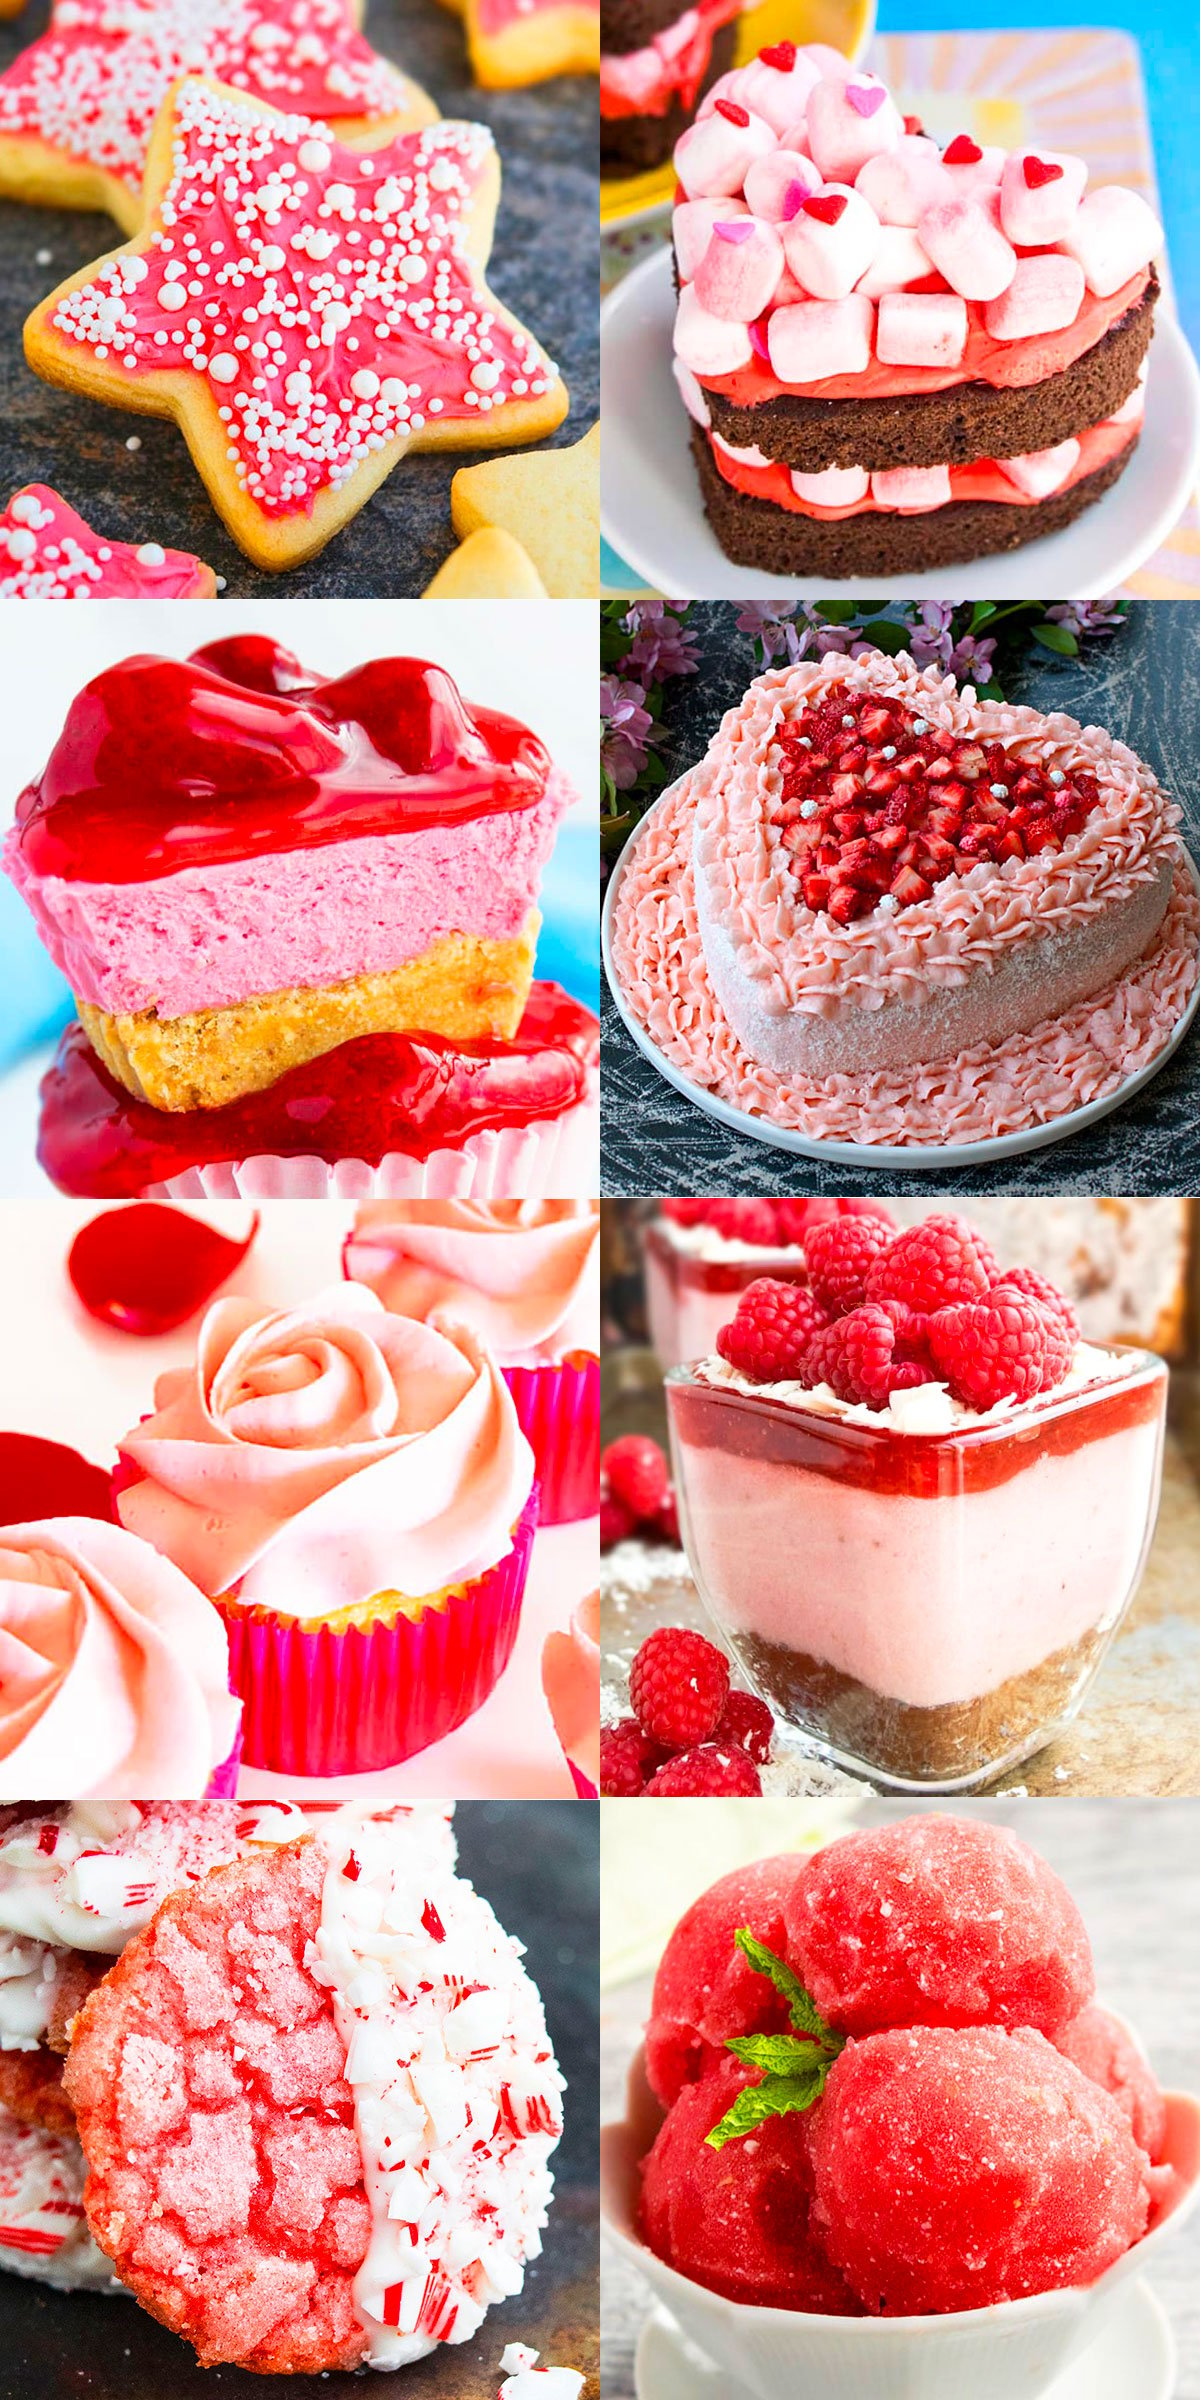 Collage Image With Easy Pink Desserts or Valentine's Day Desserts. 